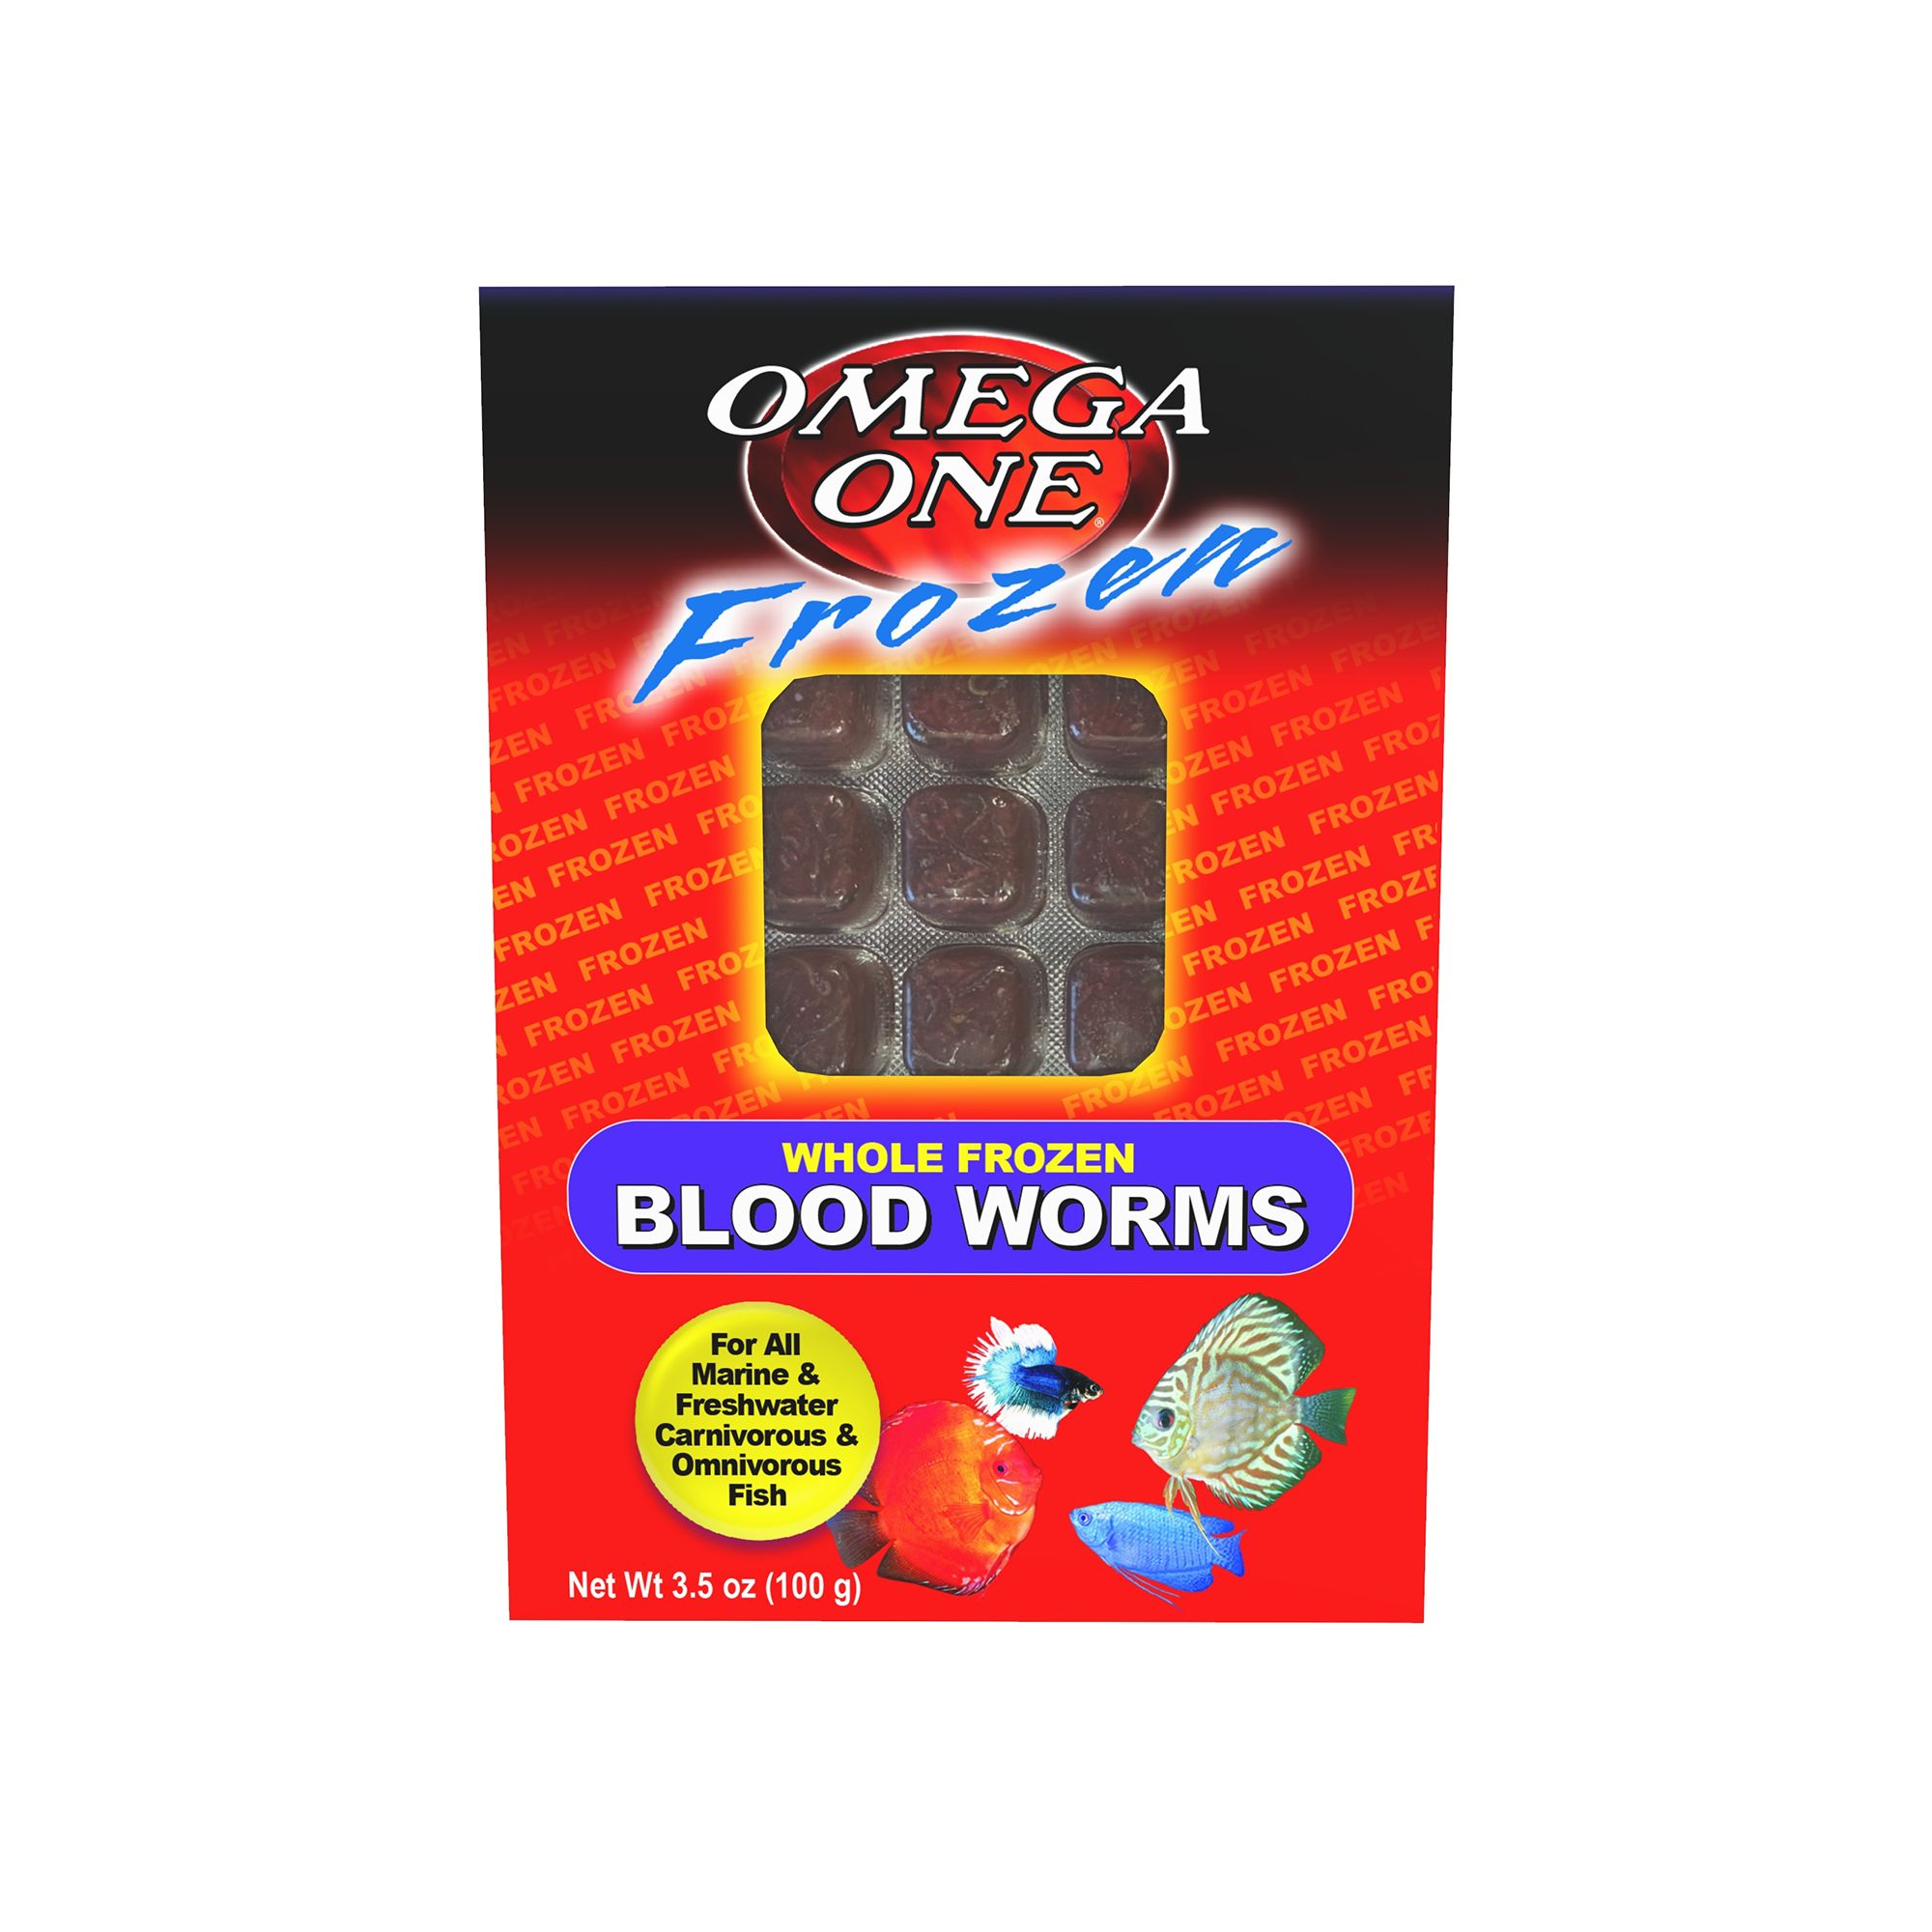 Omega™One Frozen Bloodworms